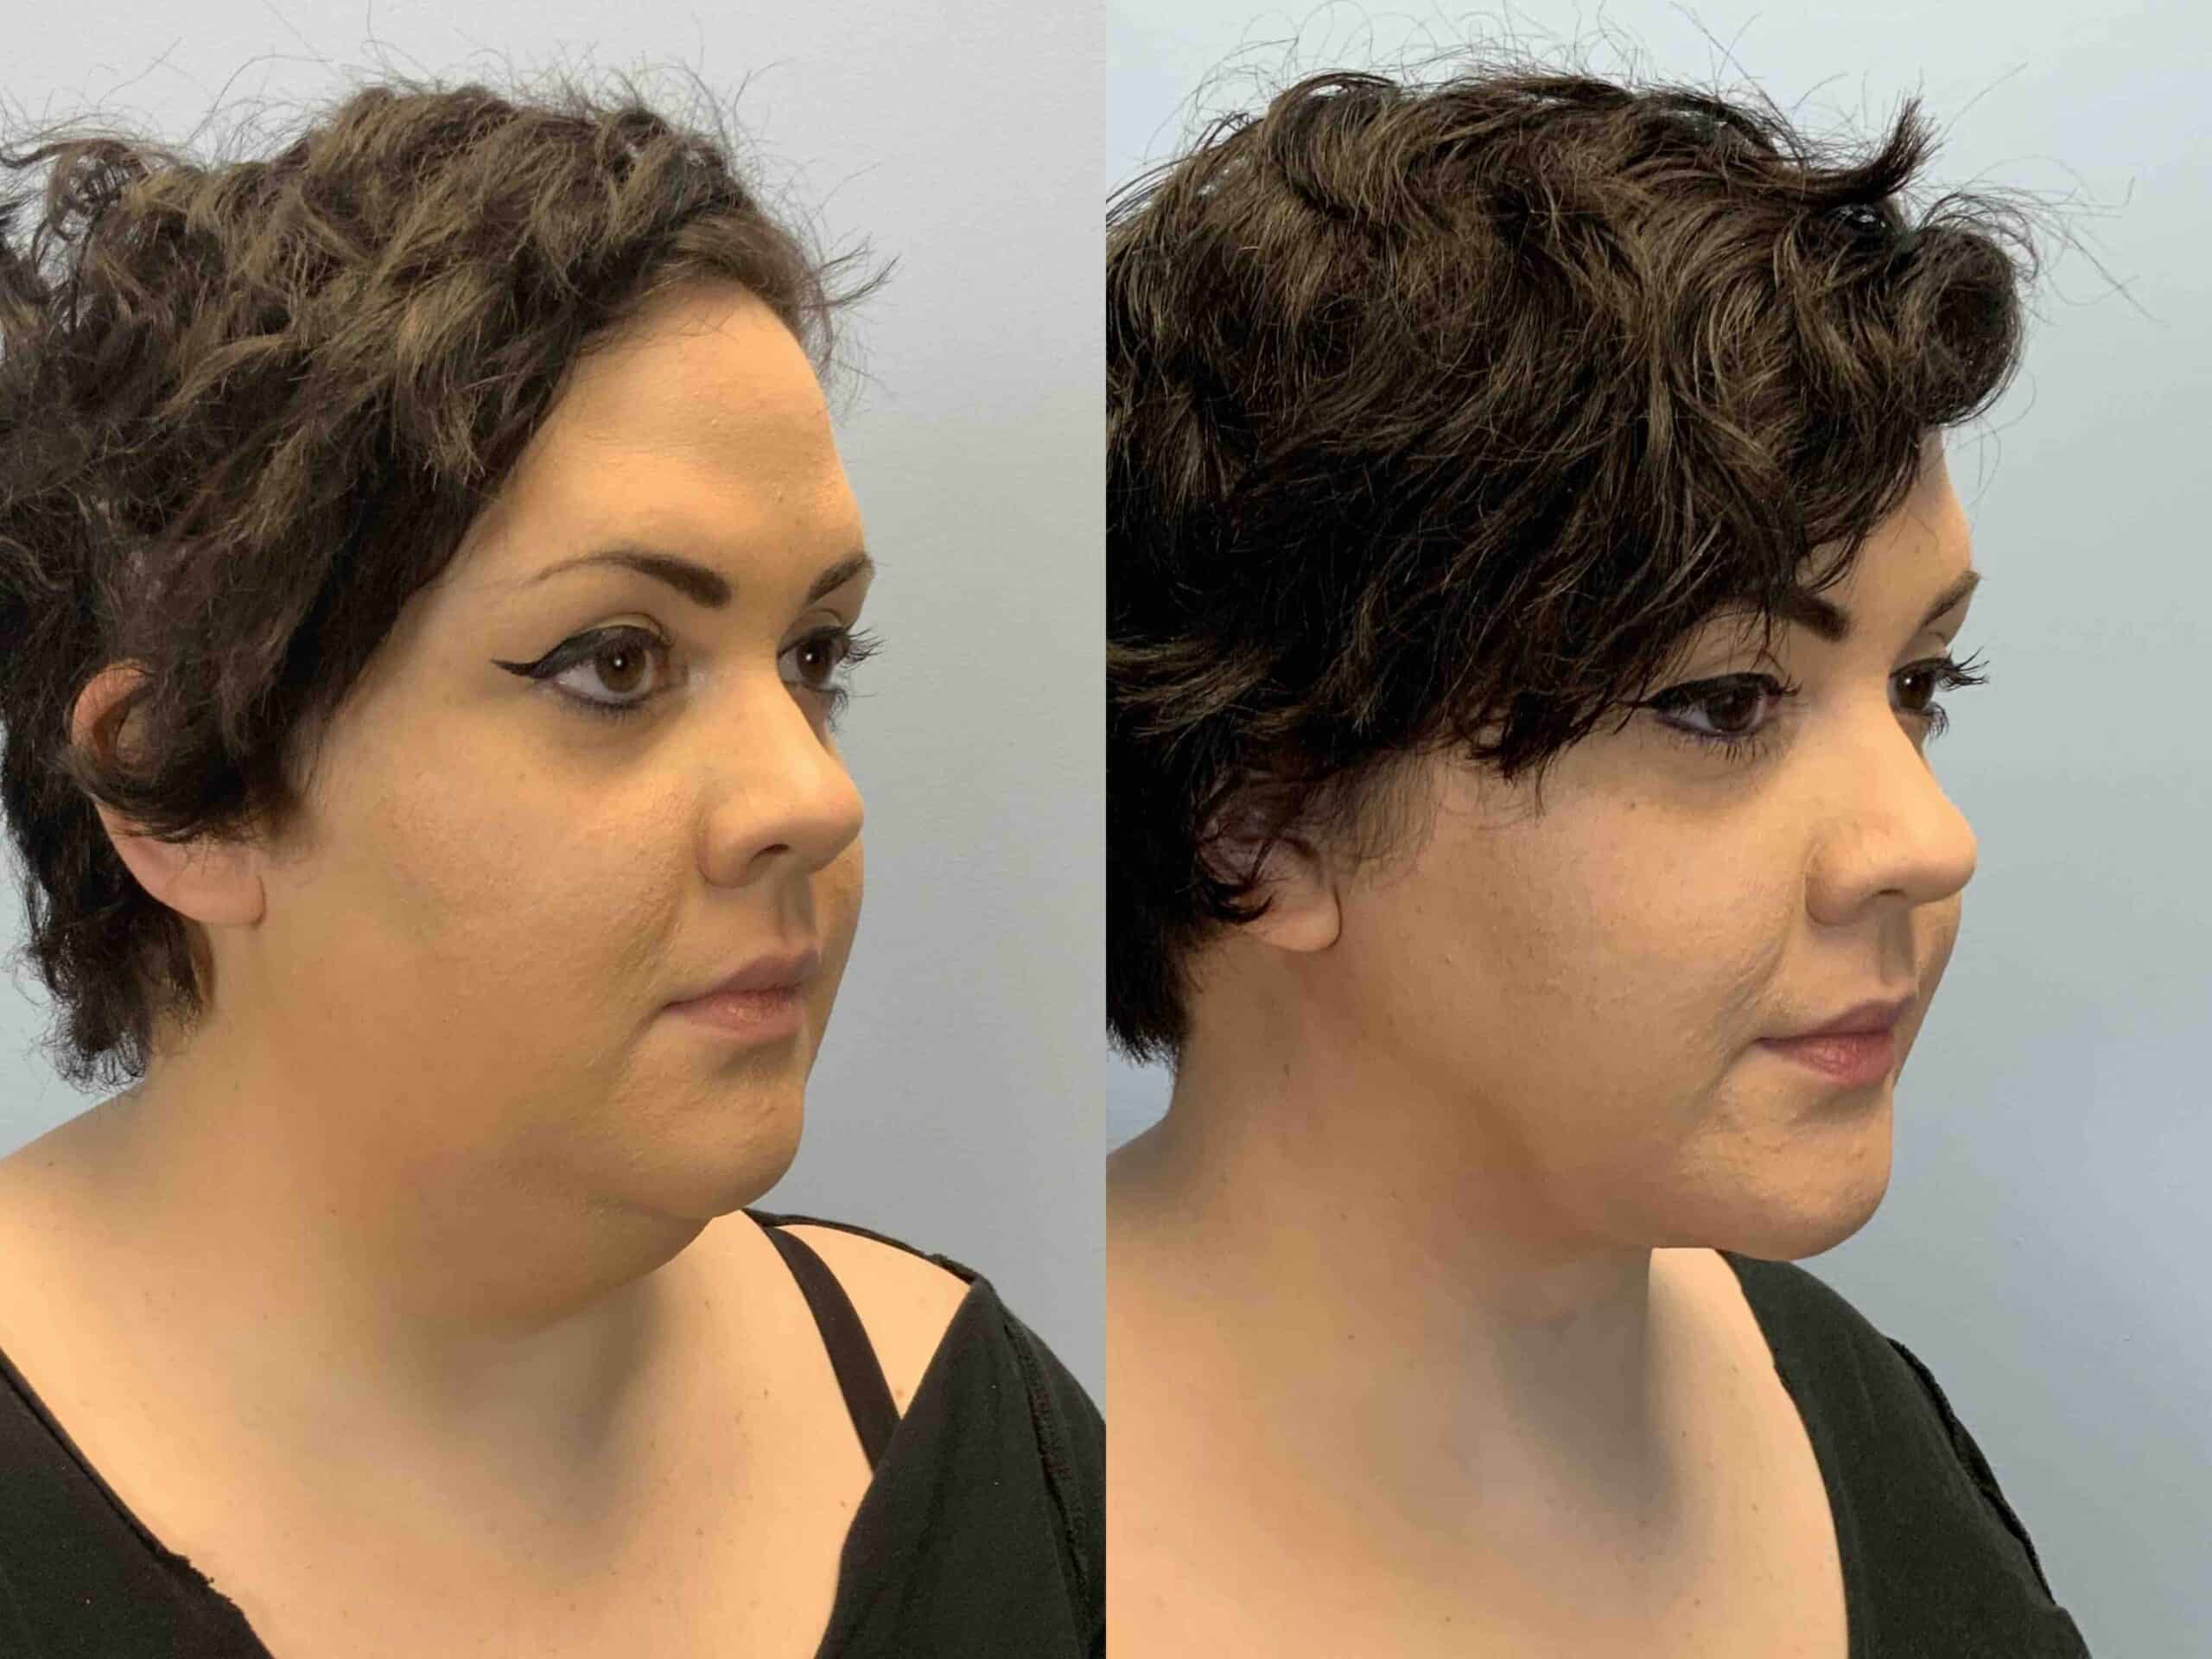 Before and after, 2 mo post op from Neck Lift performed by Dr. Paul Vanek (diagonal view)